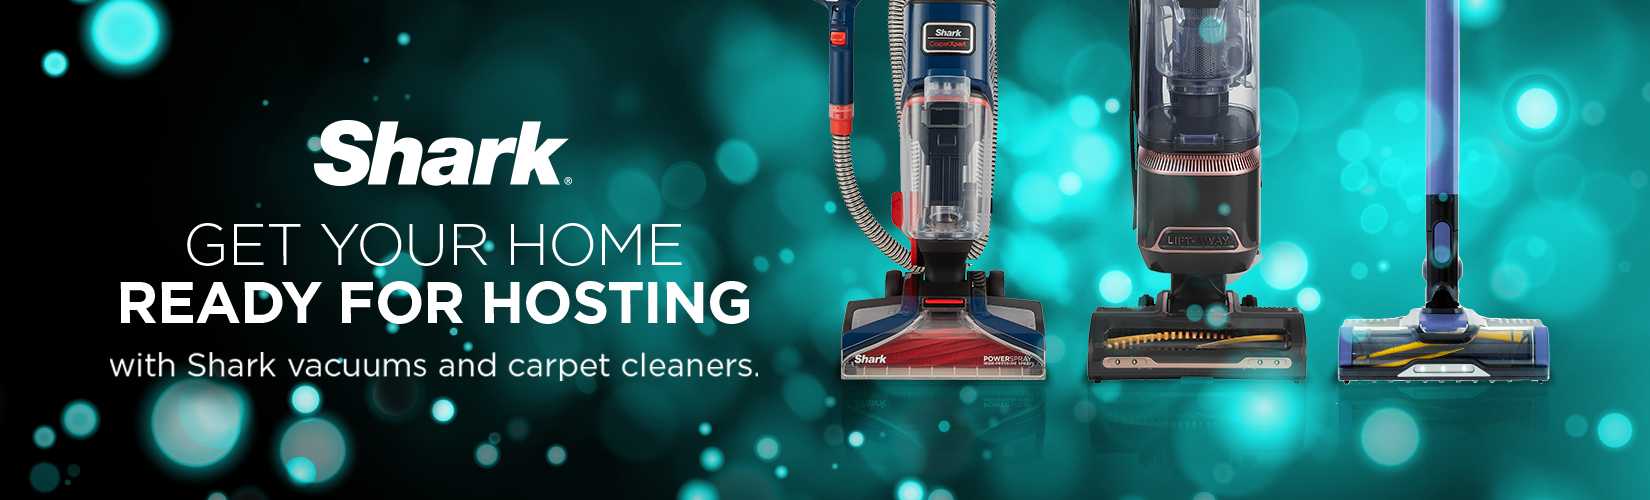 Shark. Get your home ready for hosting with Shark vaccums and carpet cleaners.